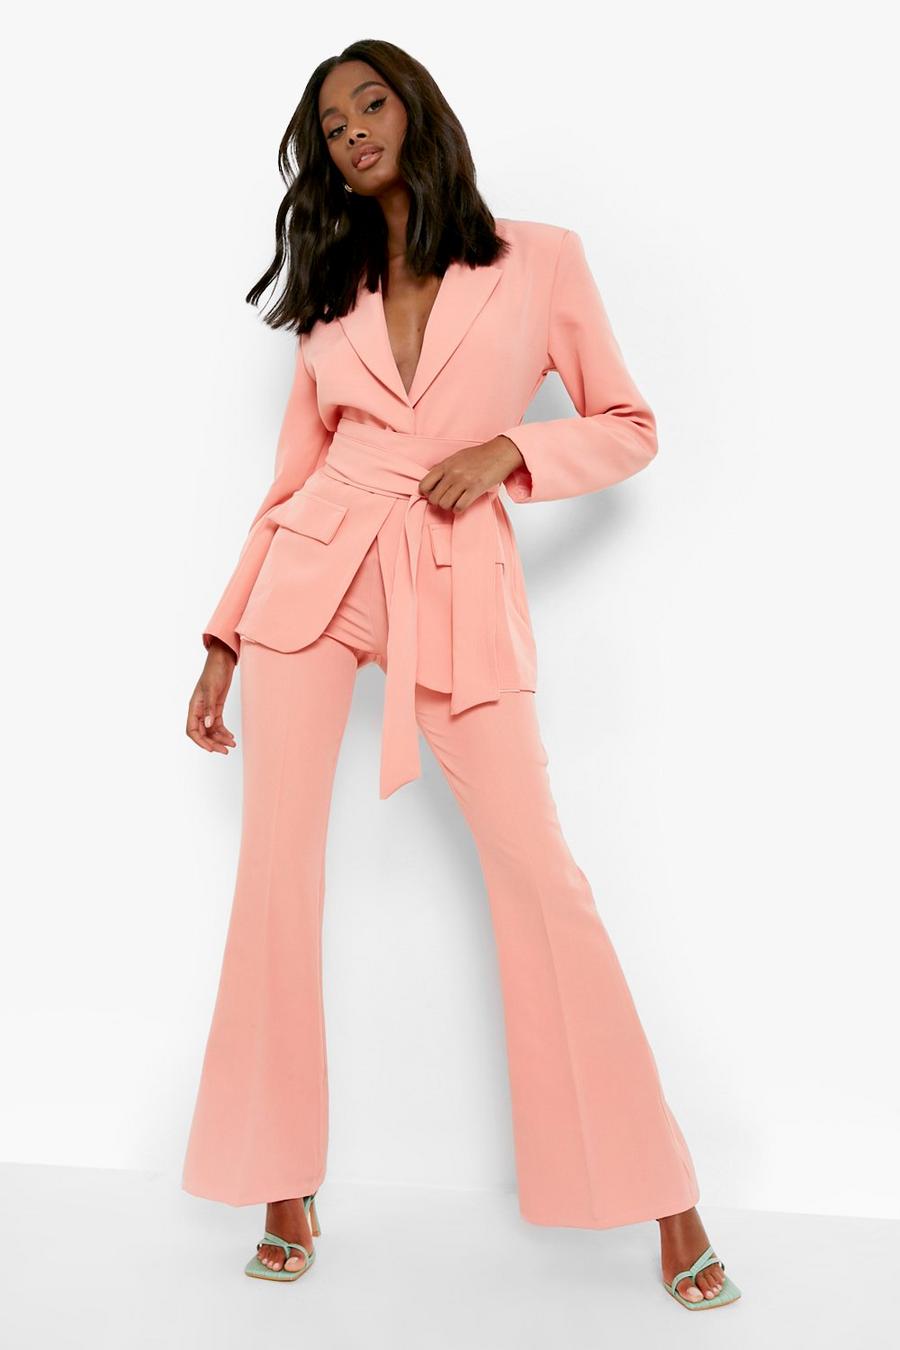 Women Pant Suit with Summer Flair